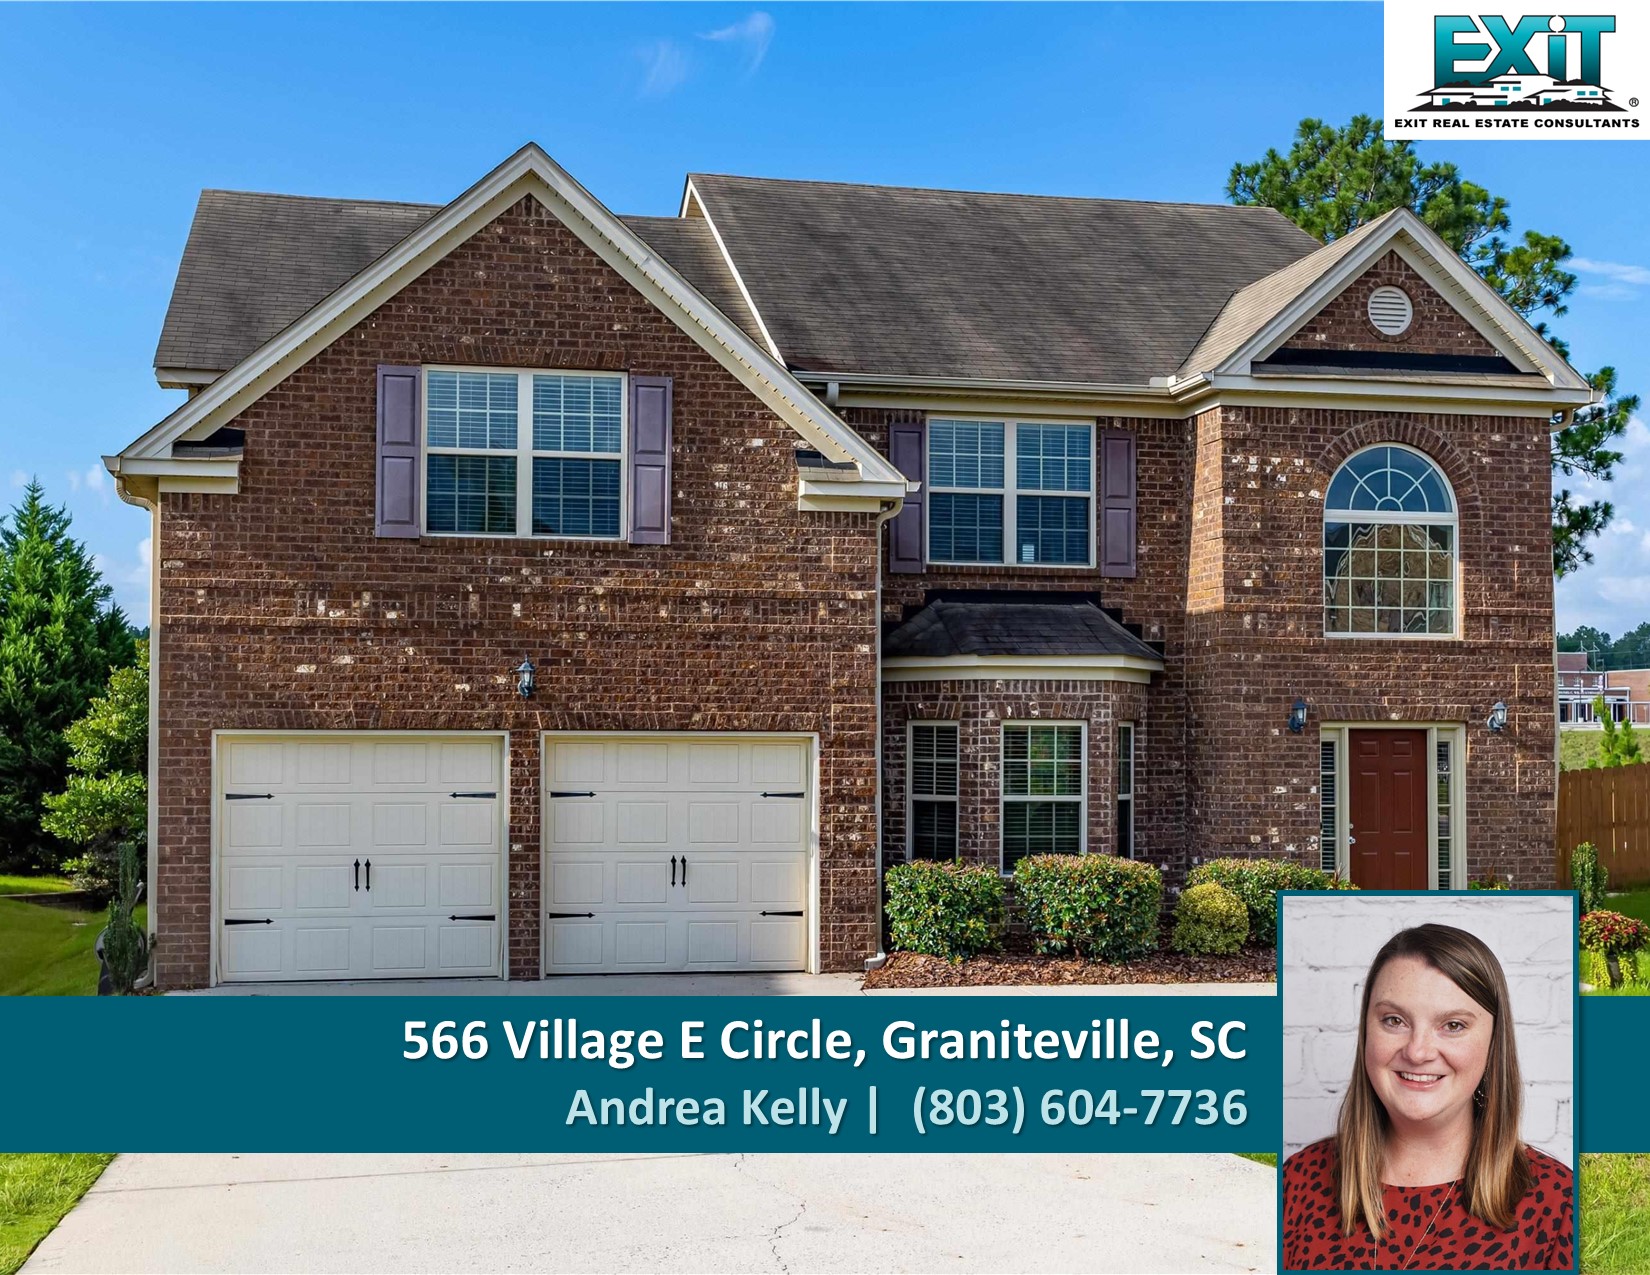 Just listed in Graniteville